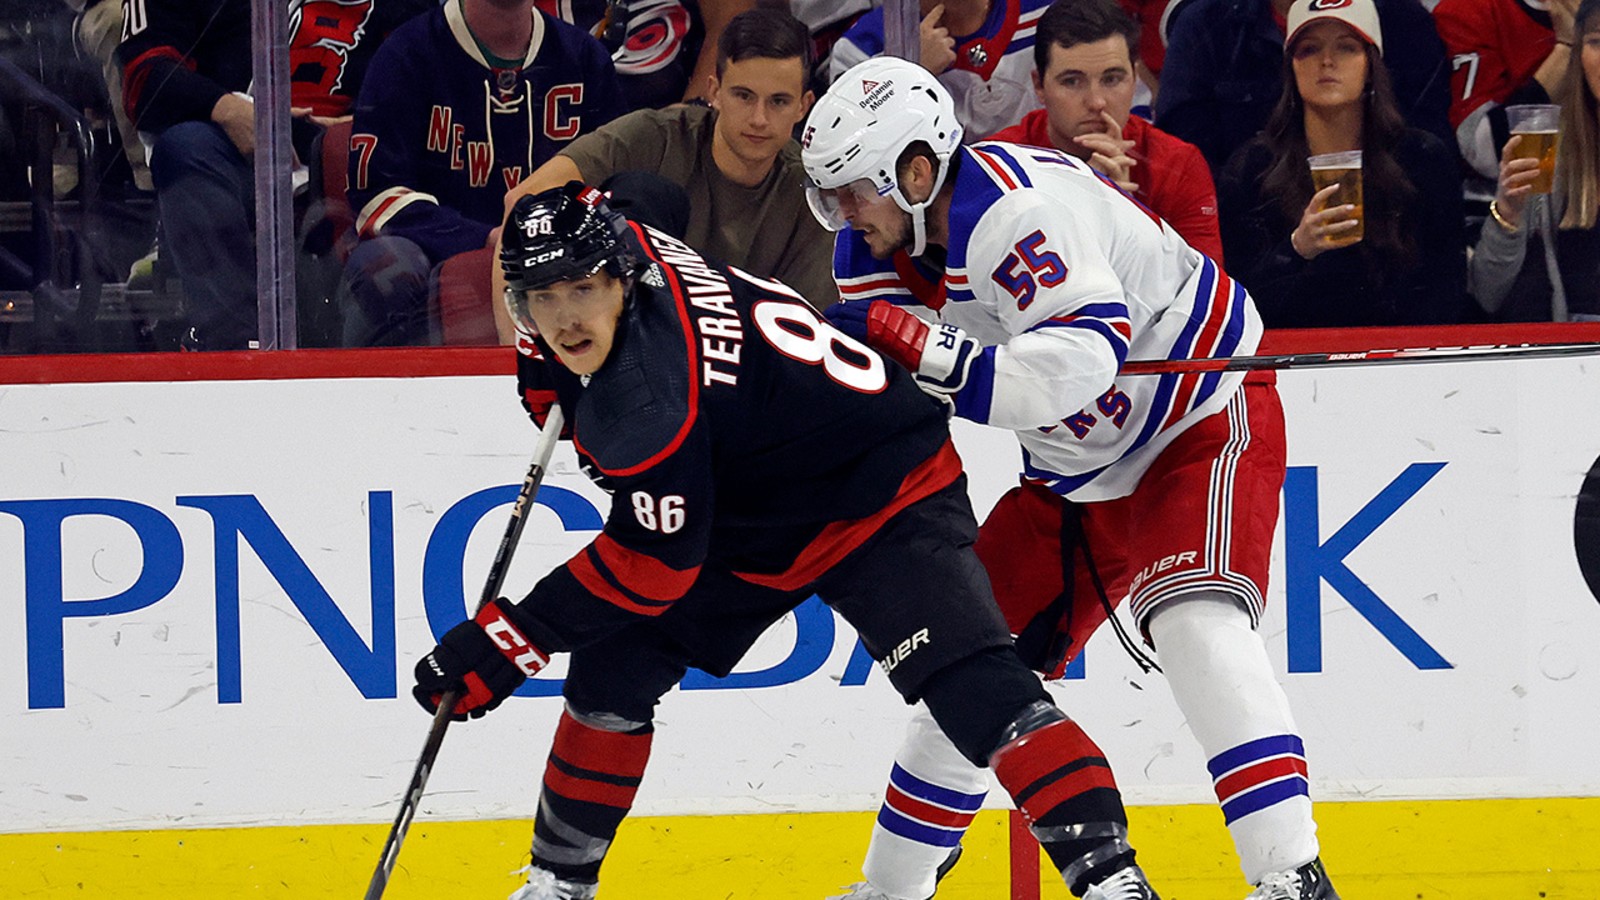 The New York Rangers were headed for another sweep. Now they're fighting to close out Carolina